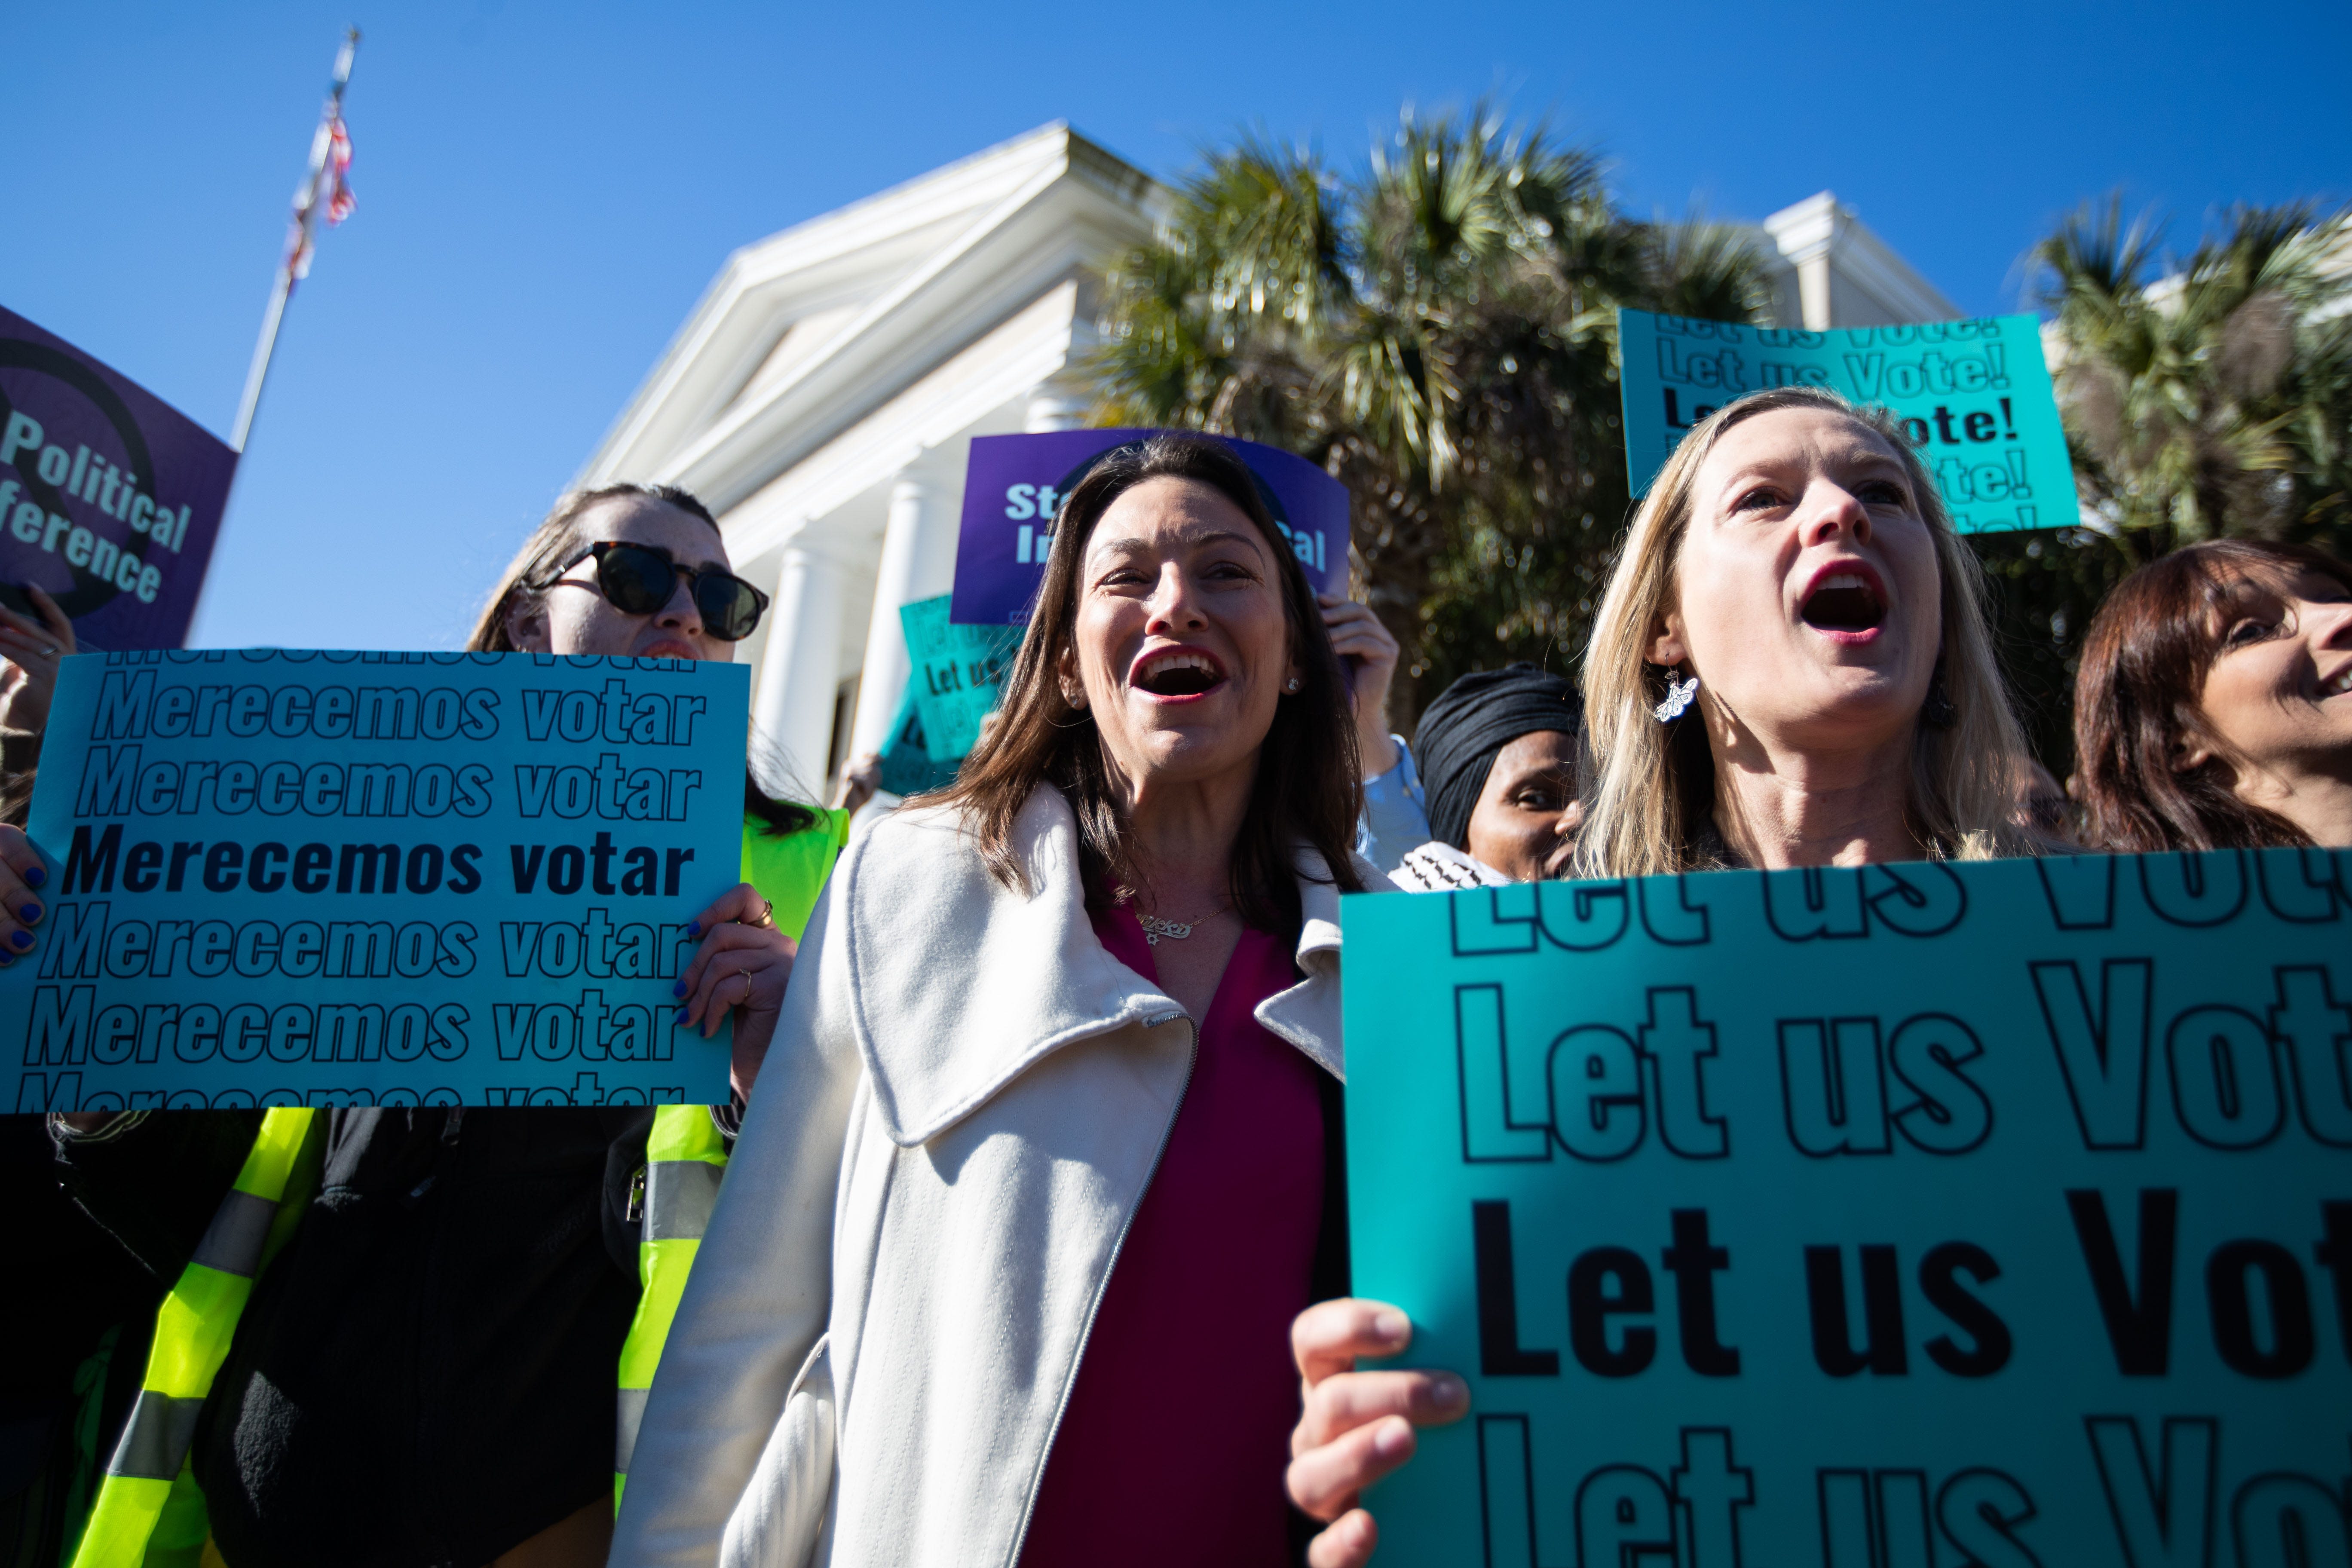 On eve of new abortion law, Democrats rally for change